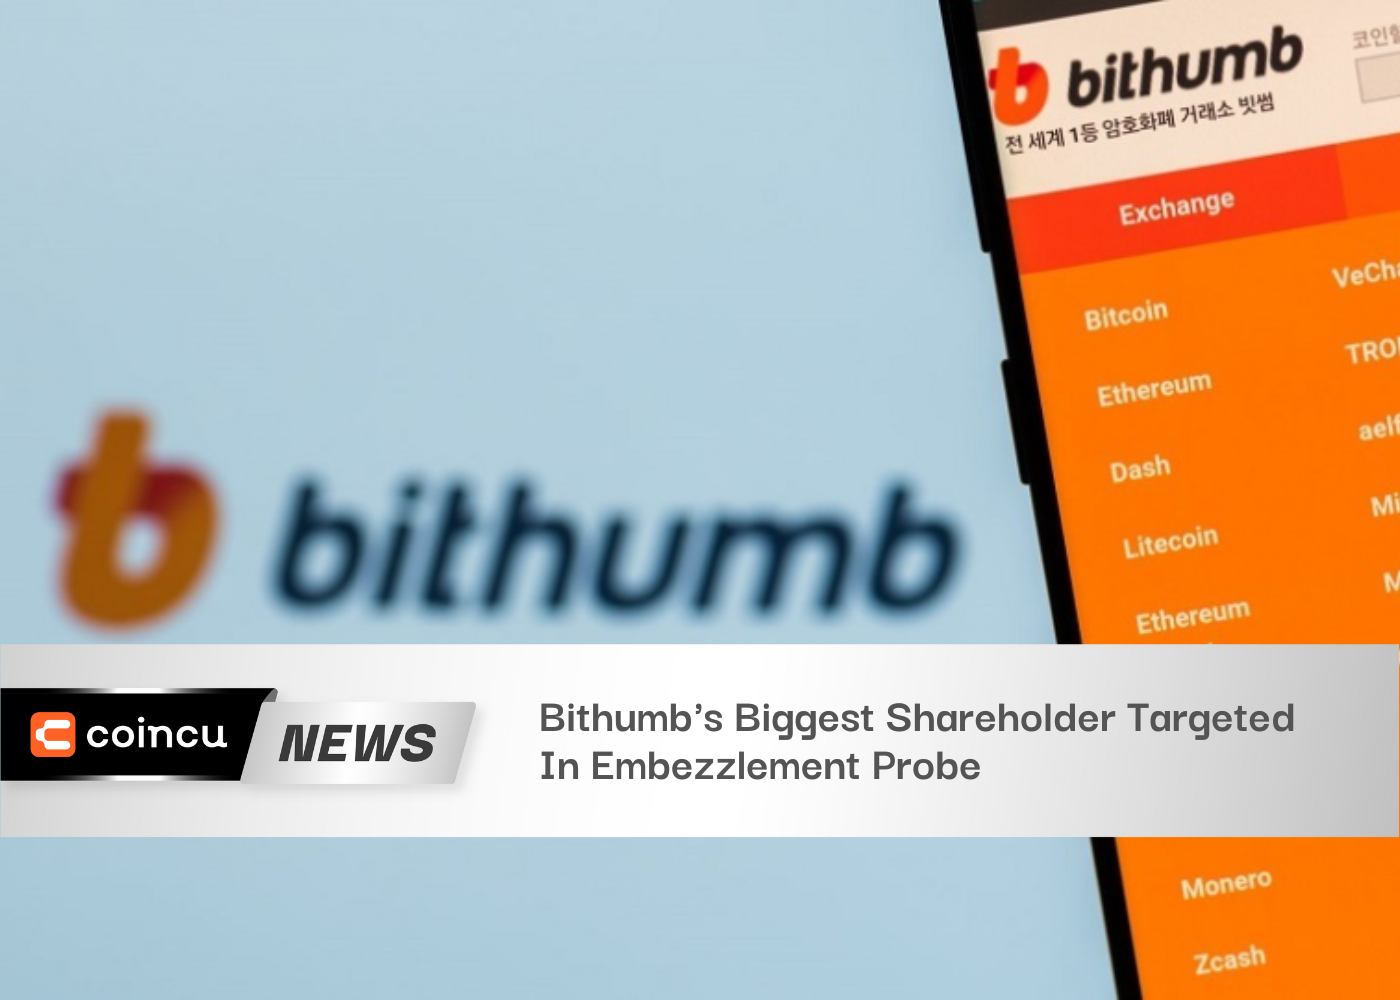 Bithumb's Biggest Shareholder Targeted In Embezzlement Probe